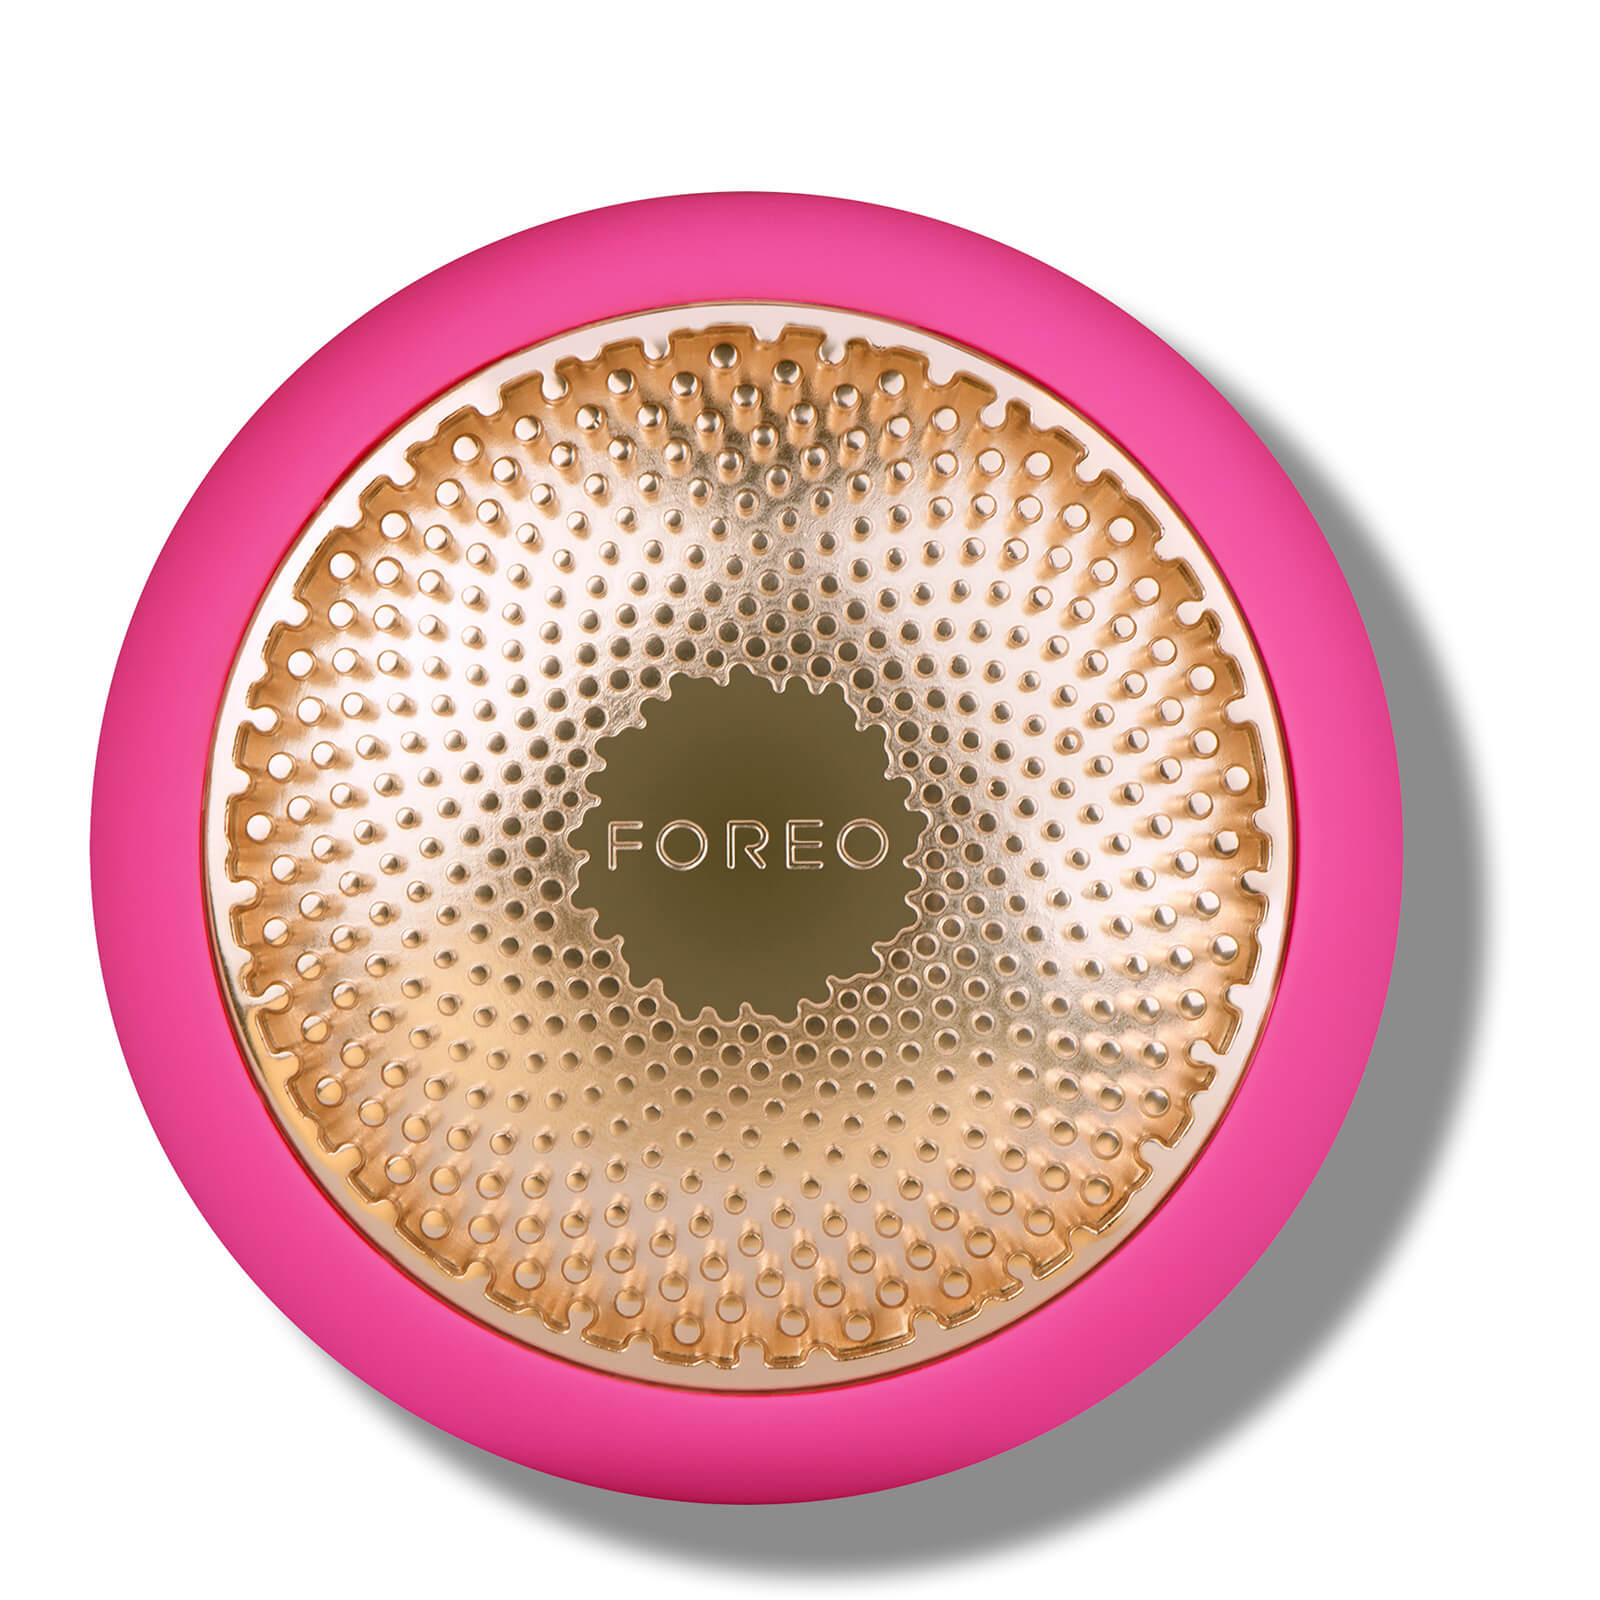 FOREO UFO Device for an Accelerated Mask Treatment (Various Shades) - Fuchsia